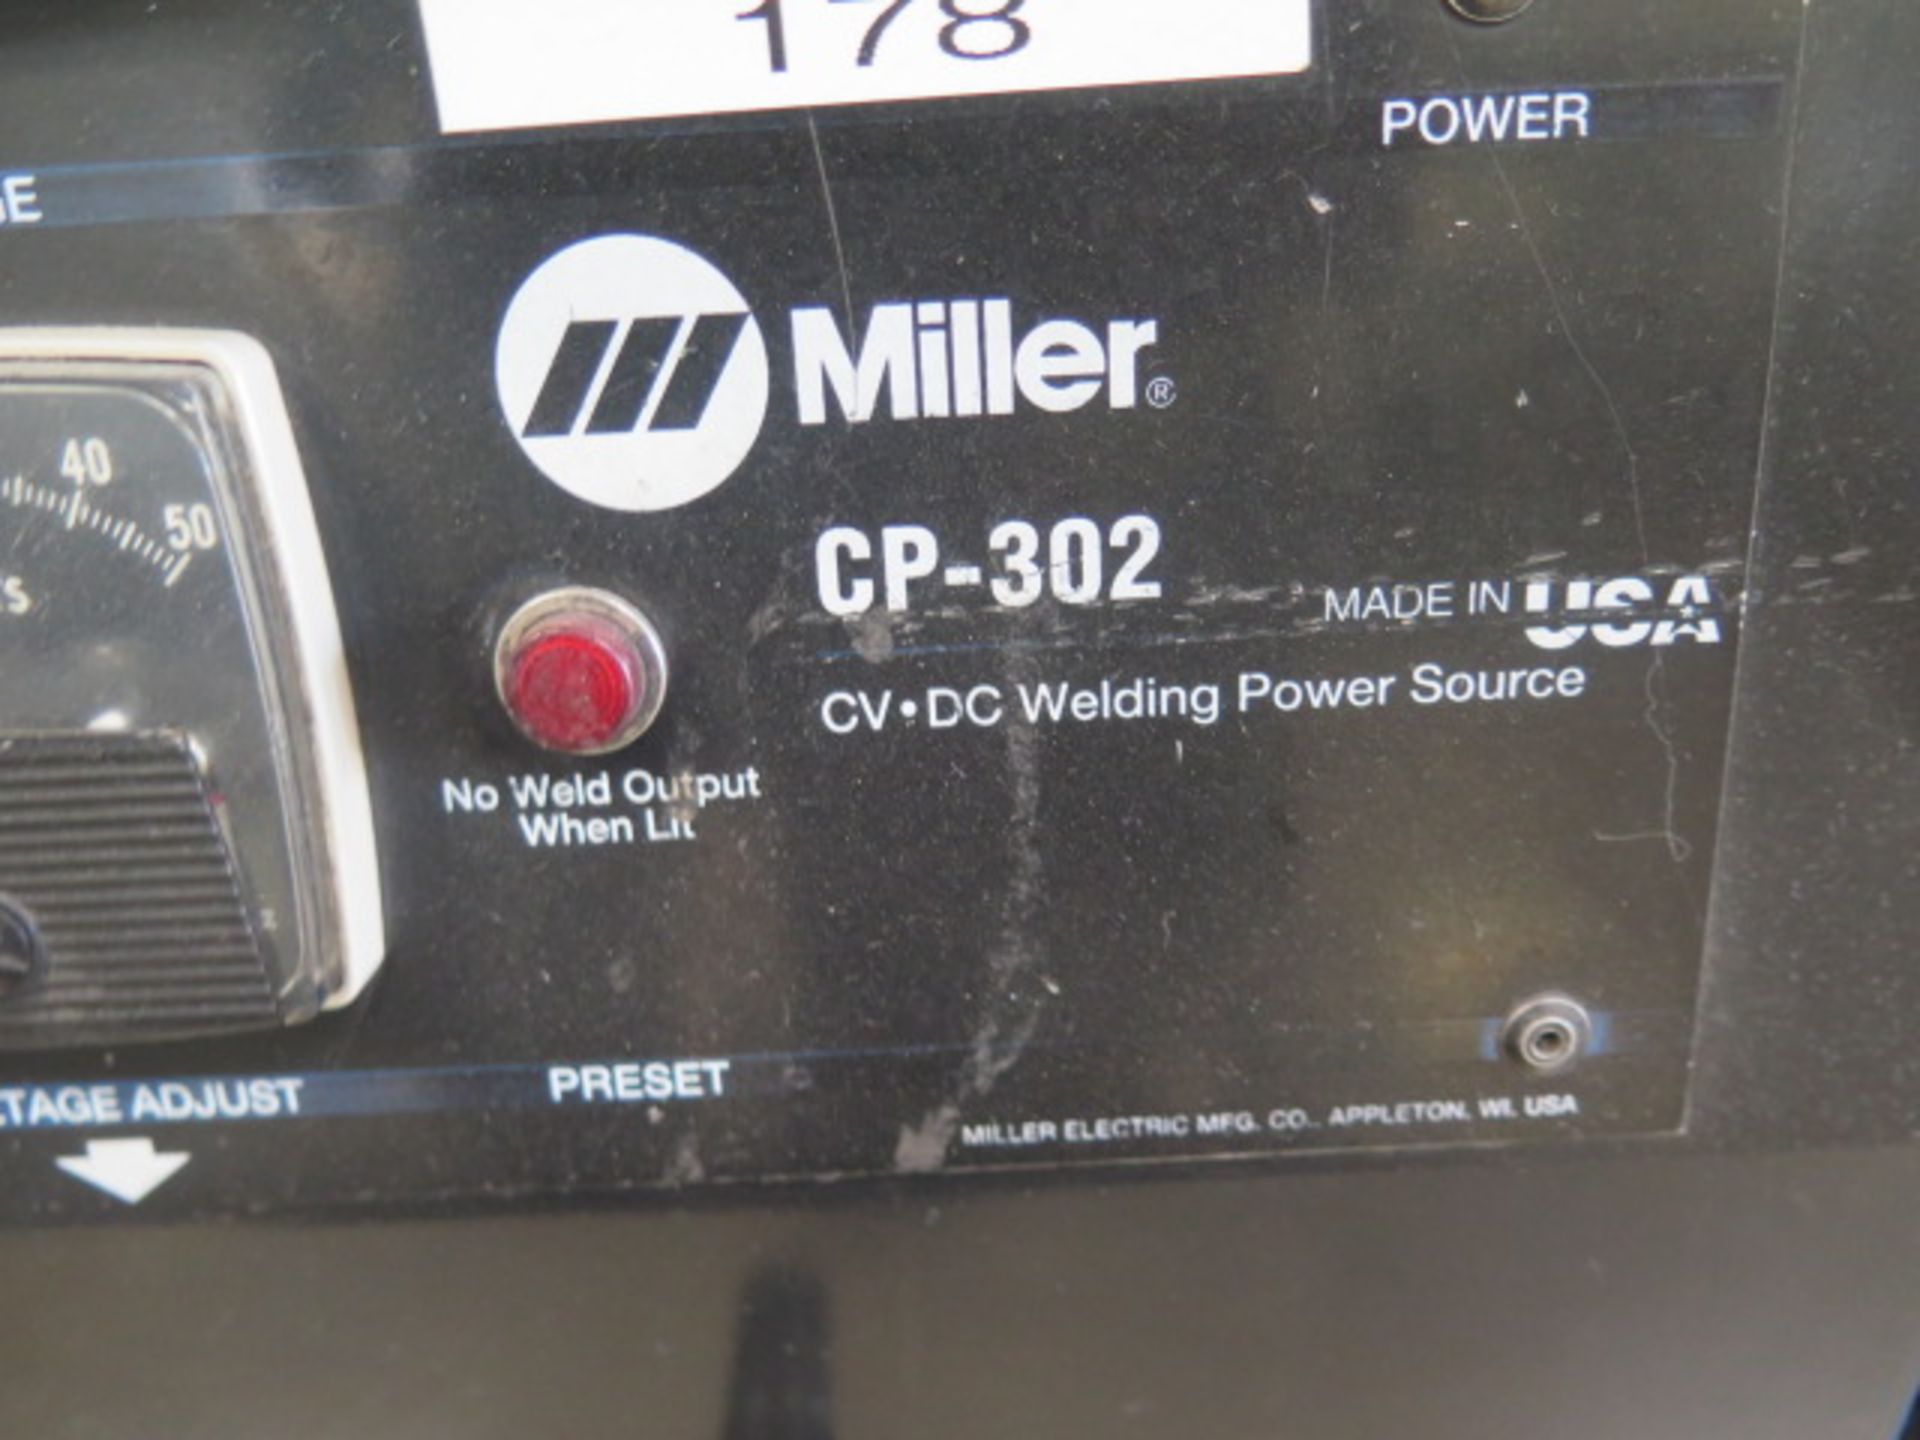 Miller CP-302 CV-DC Arc Welding Power Source (SOLD AS-IS - NO WARRANTY) - Image 5 of 5